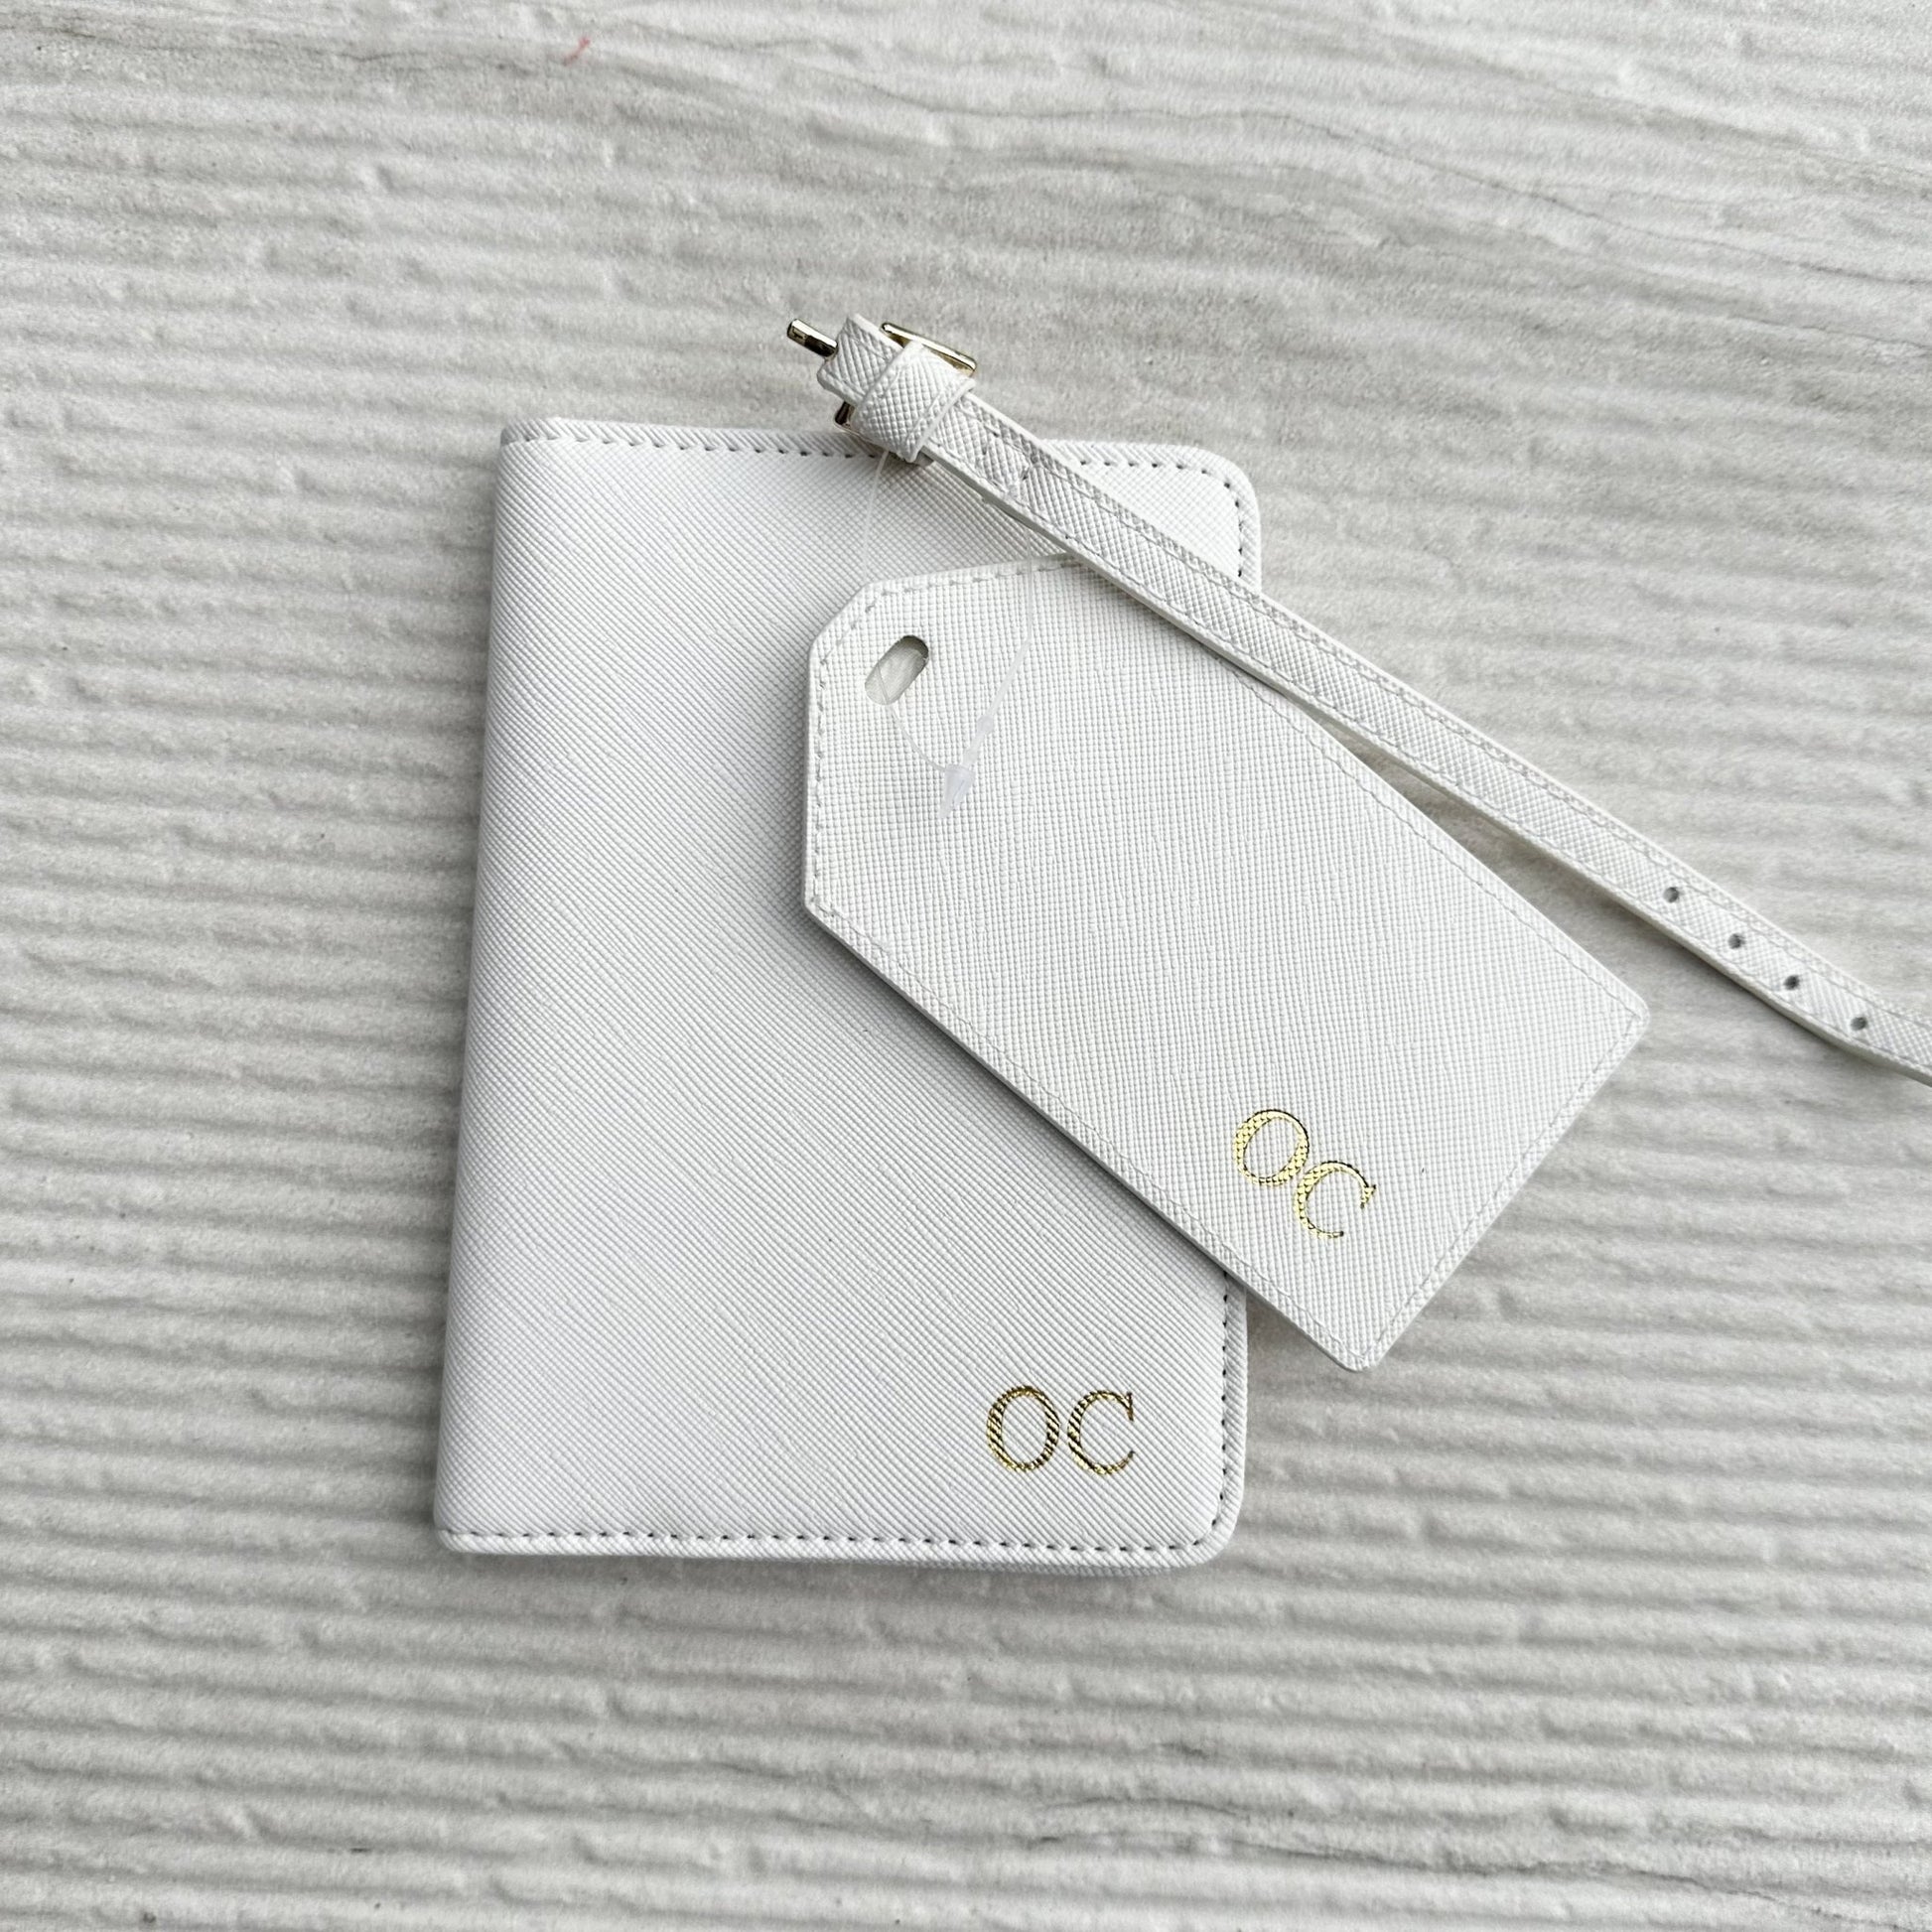 Personalised Passport Holder and Tag Set - OLIVIA AND GRAY LTD